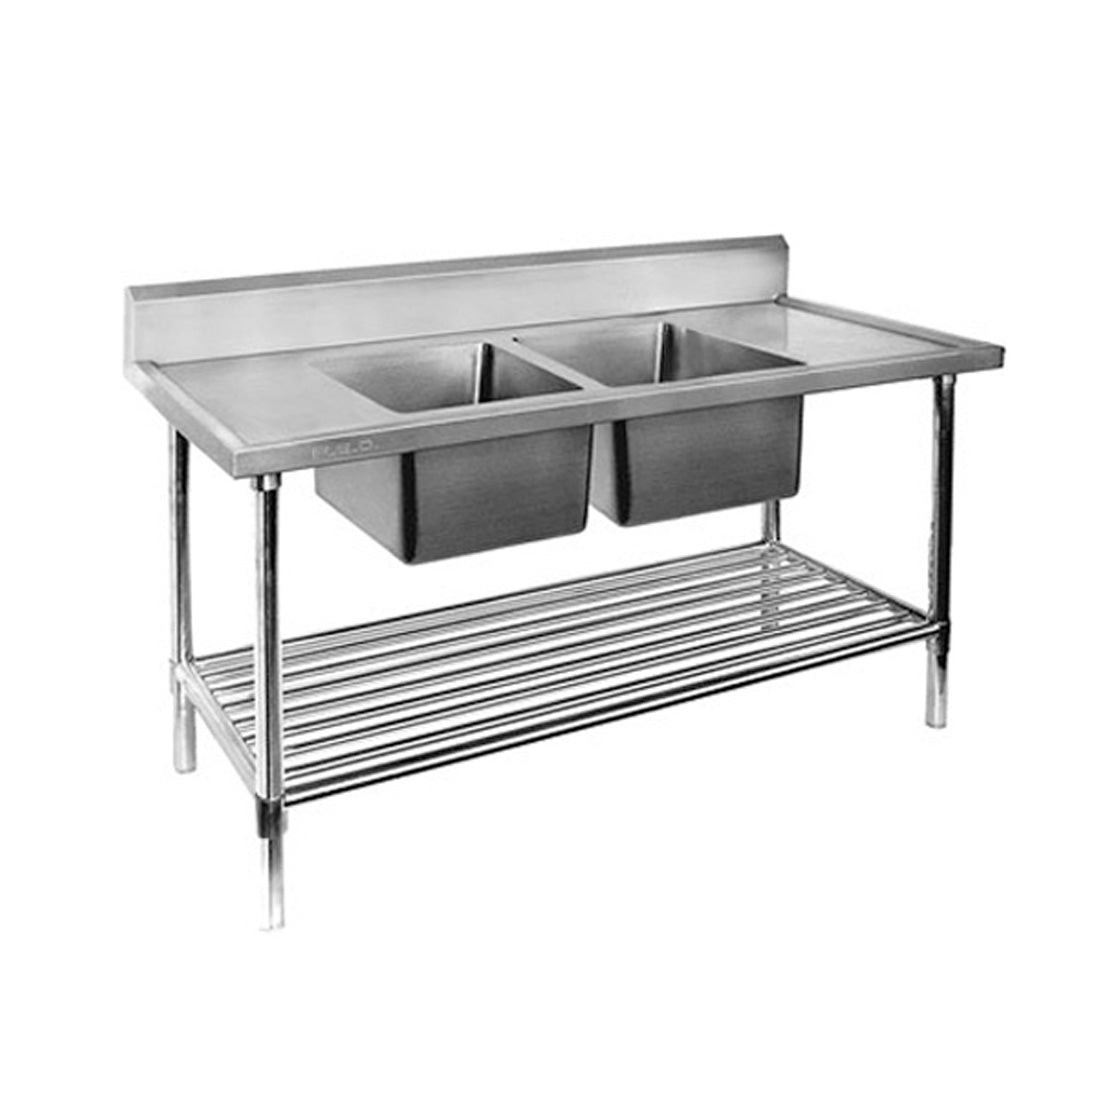 Modular Systems Double Centre Sink Bench with Pot Undershelf 2100x700x900 DSB7-2100C/A